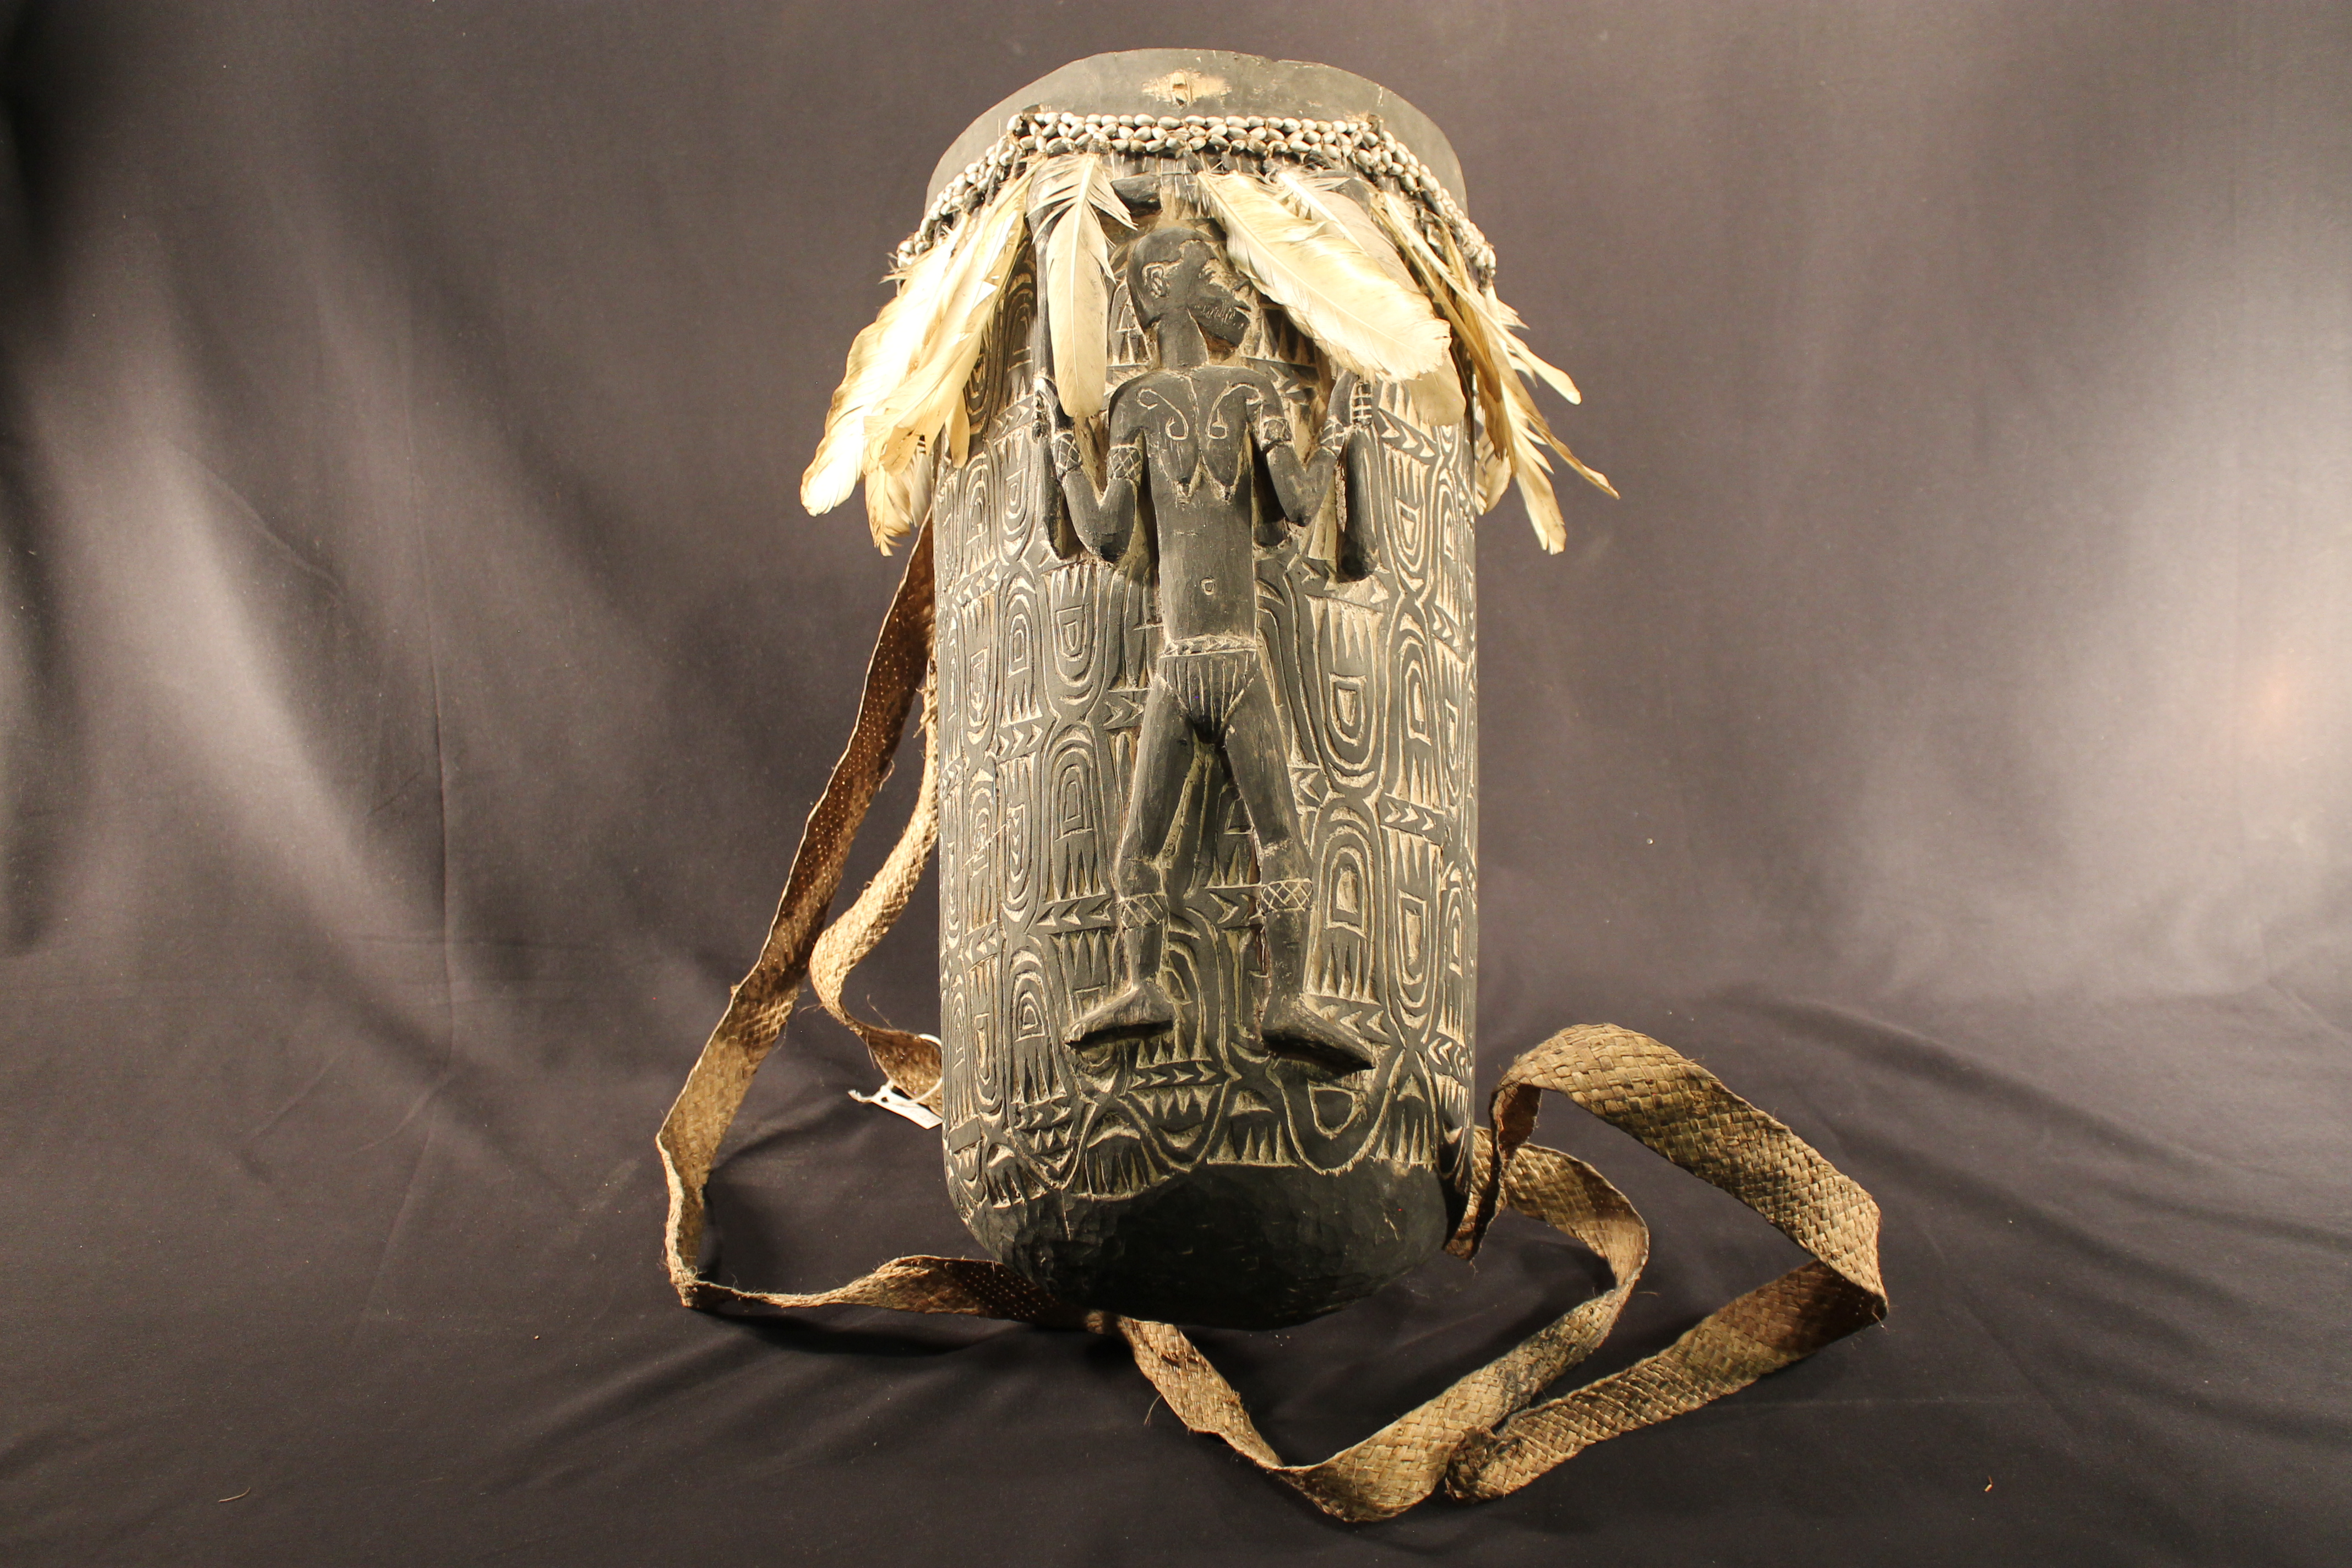 Carved wooden basket with woven attached traps. The front depicts a man. A band of seed beads and feathers are attached. 